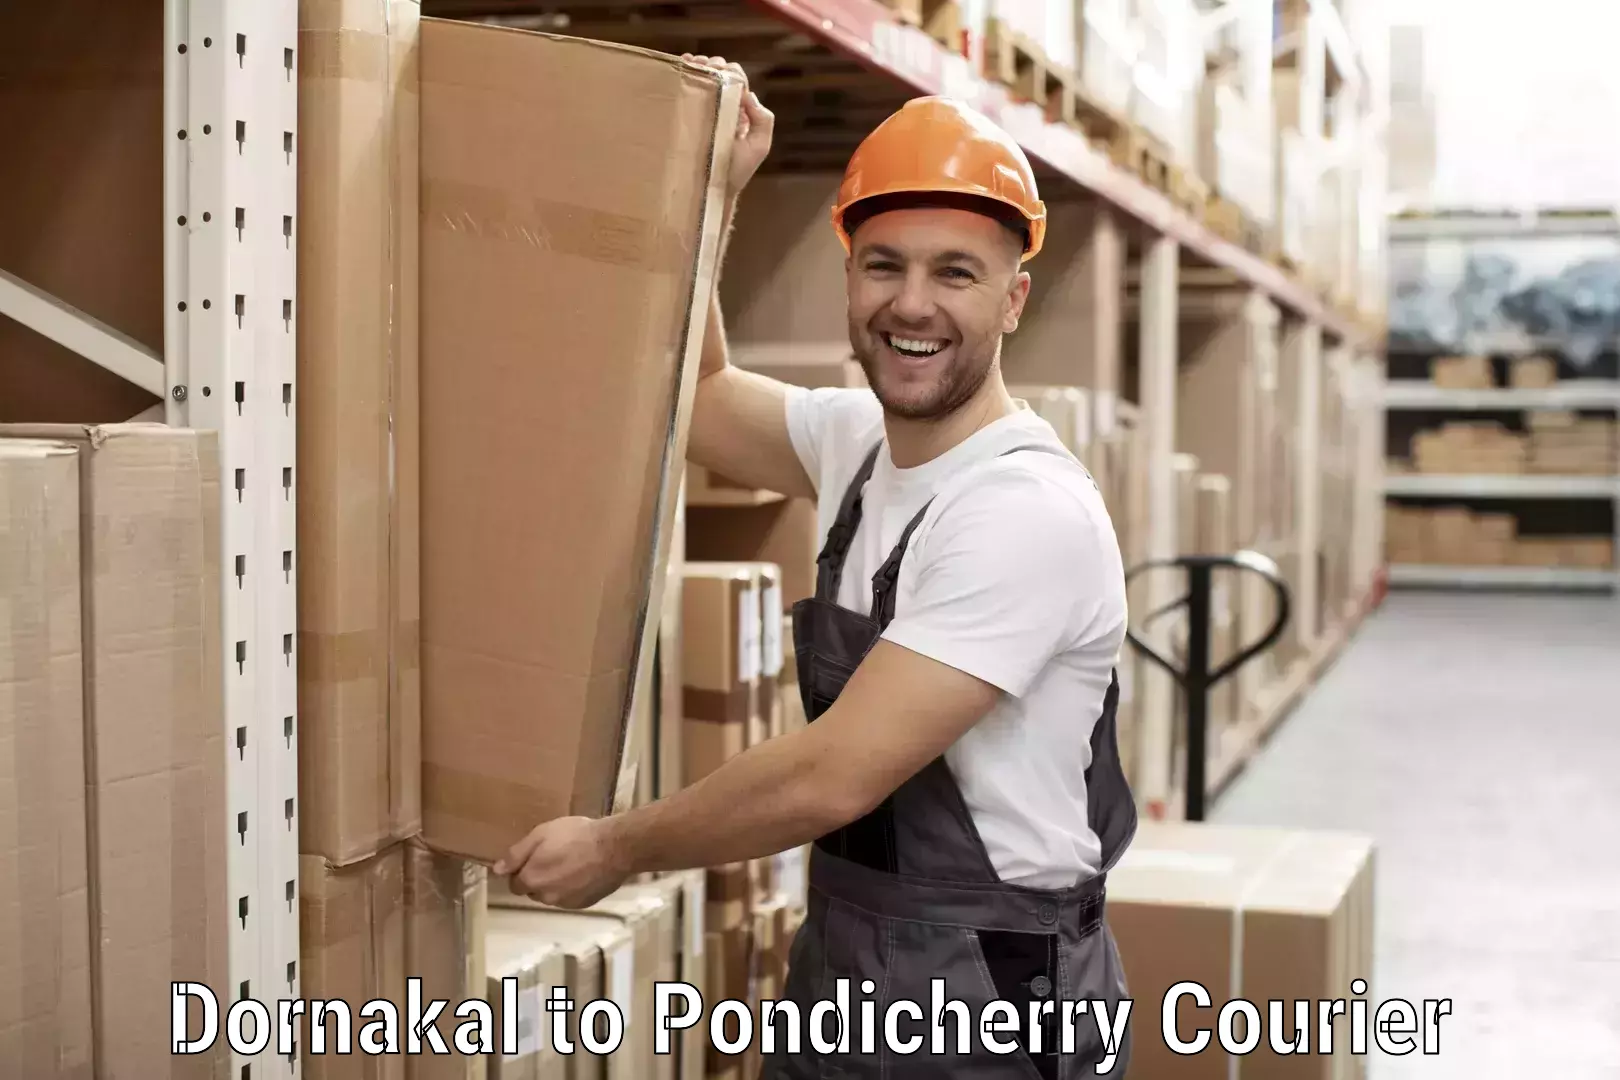 Quality courier partnerships Dornakal to Pondicherry